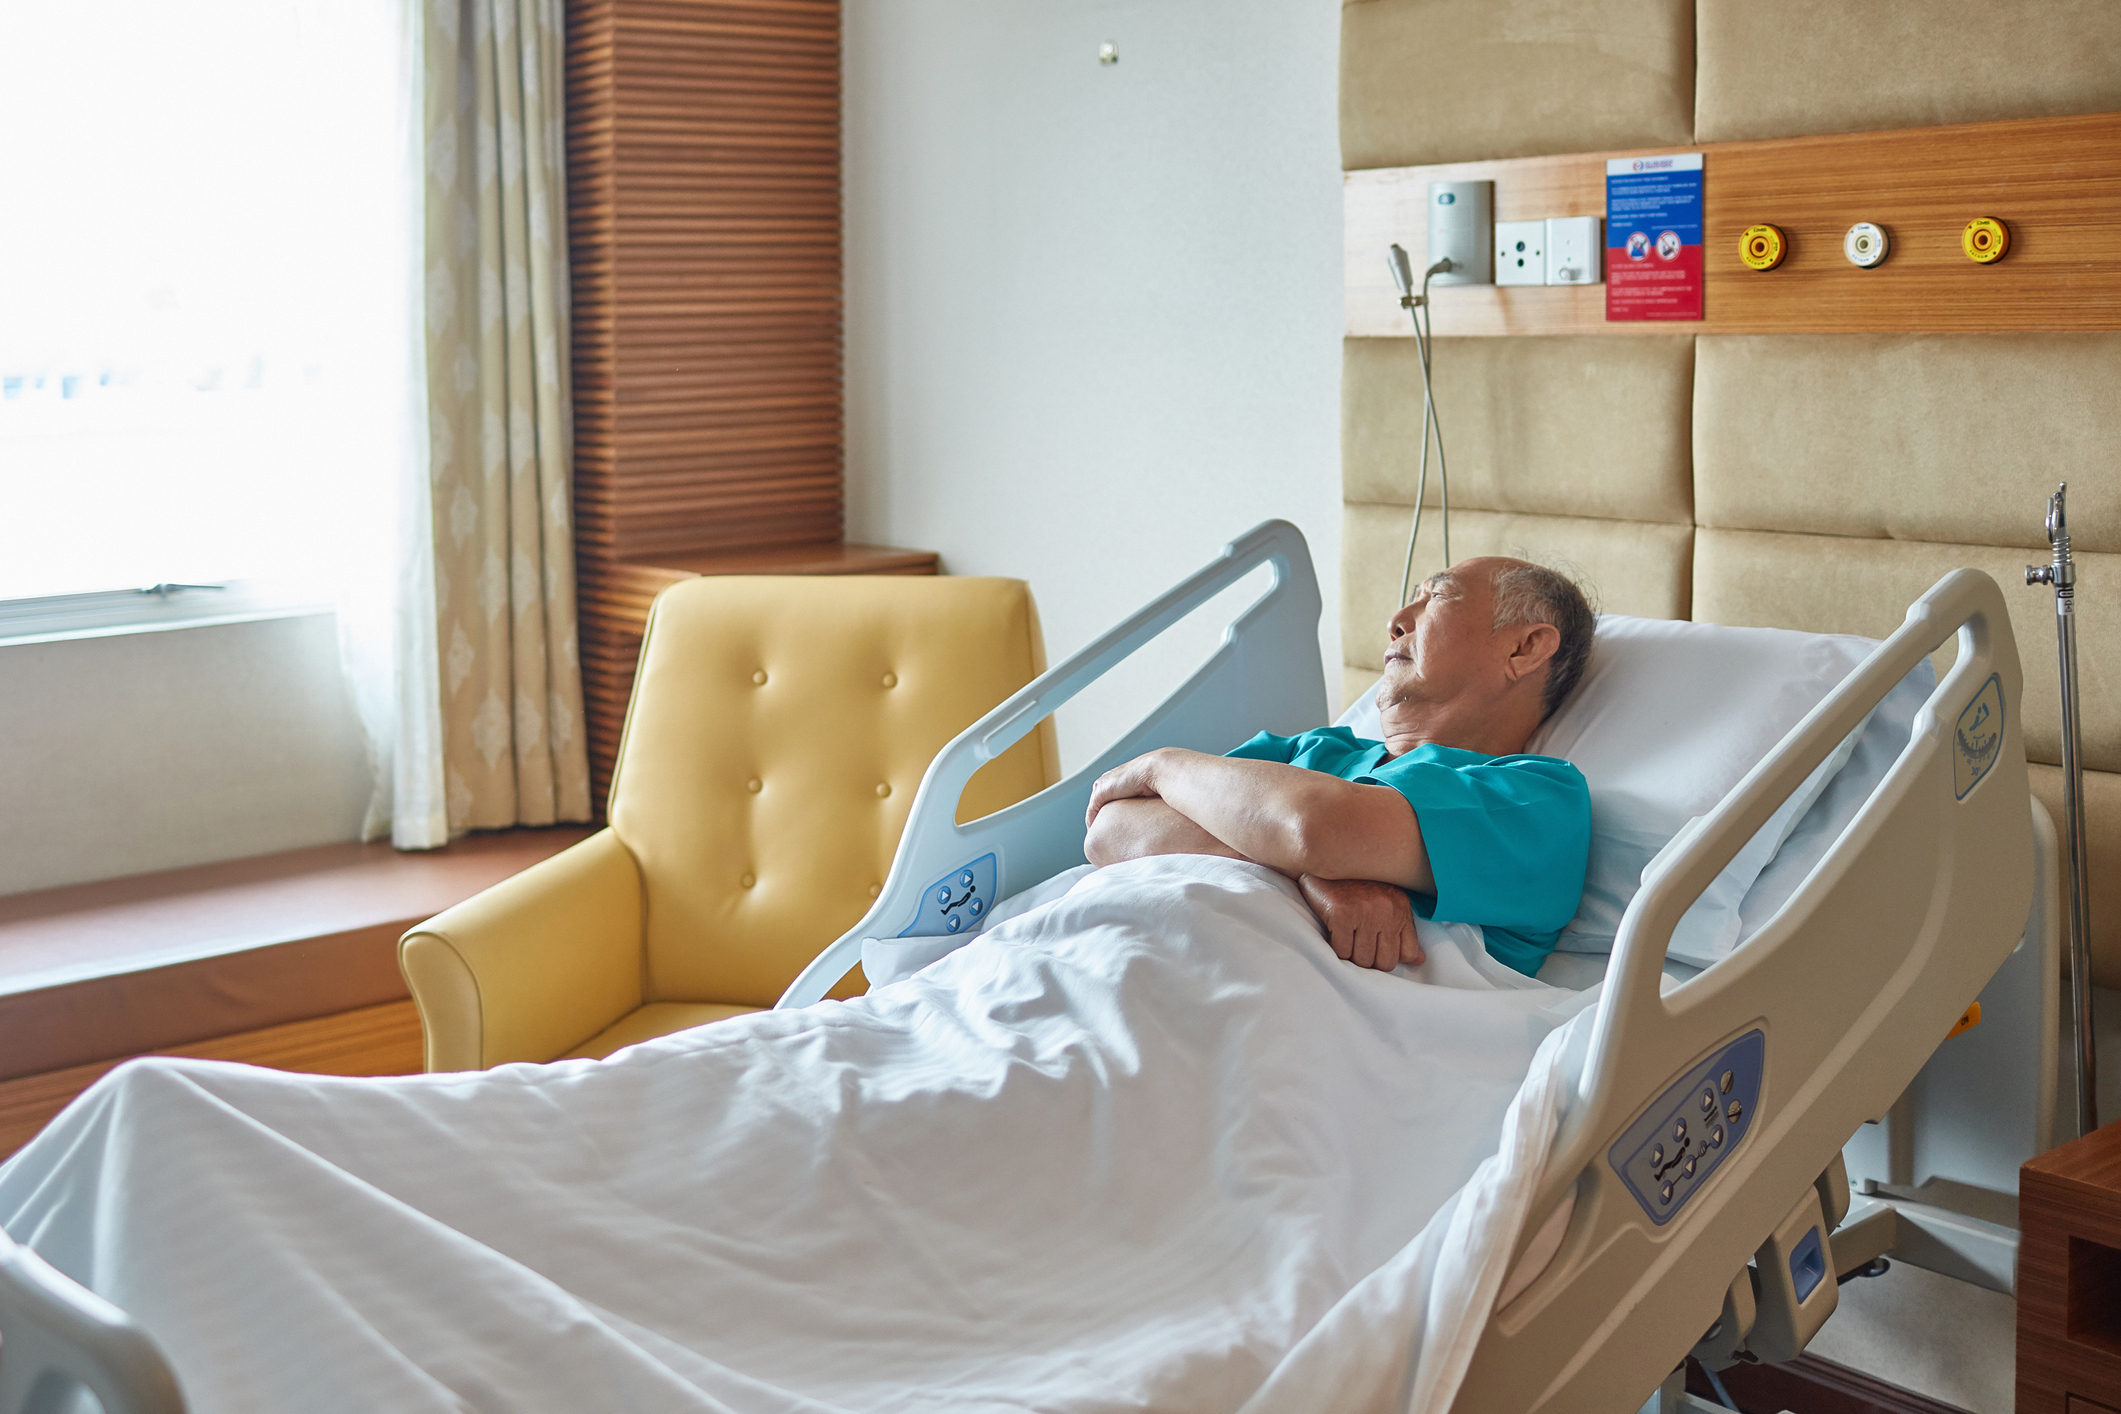 Hospital-induced delirium in older adults is not uncommon.